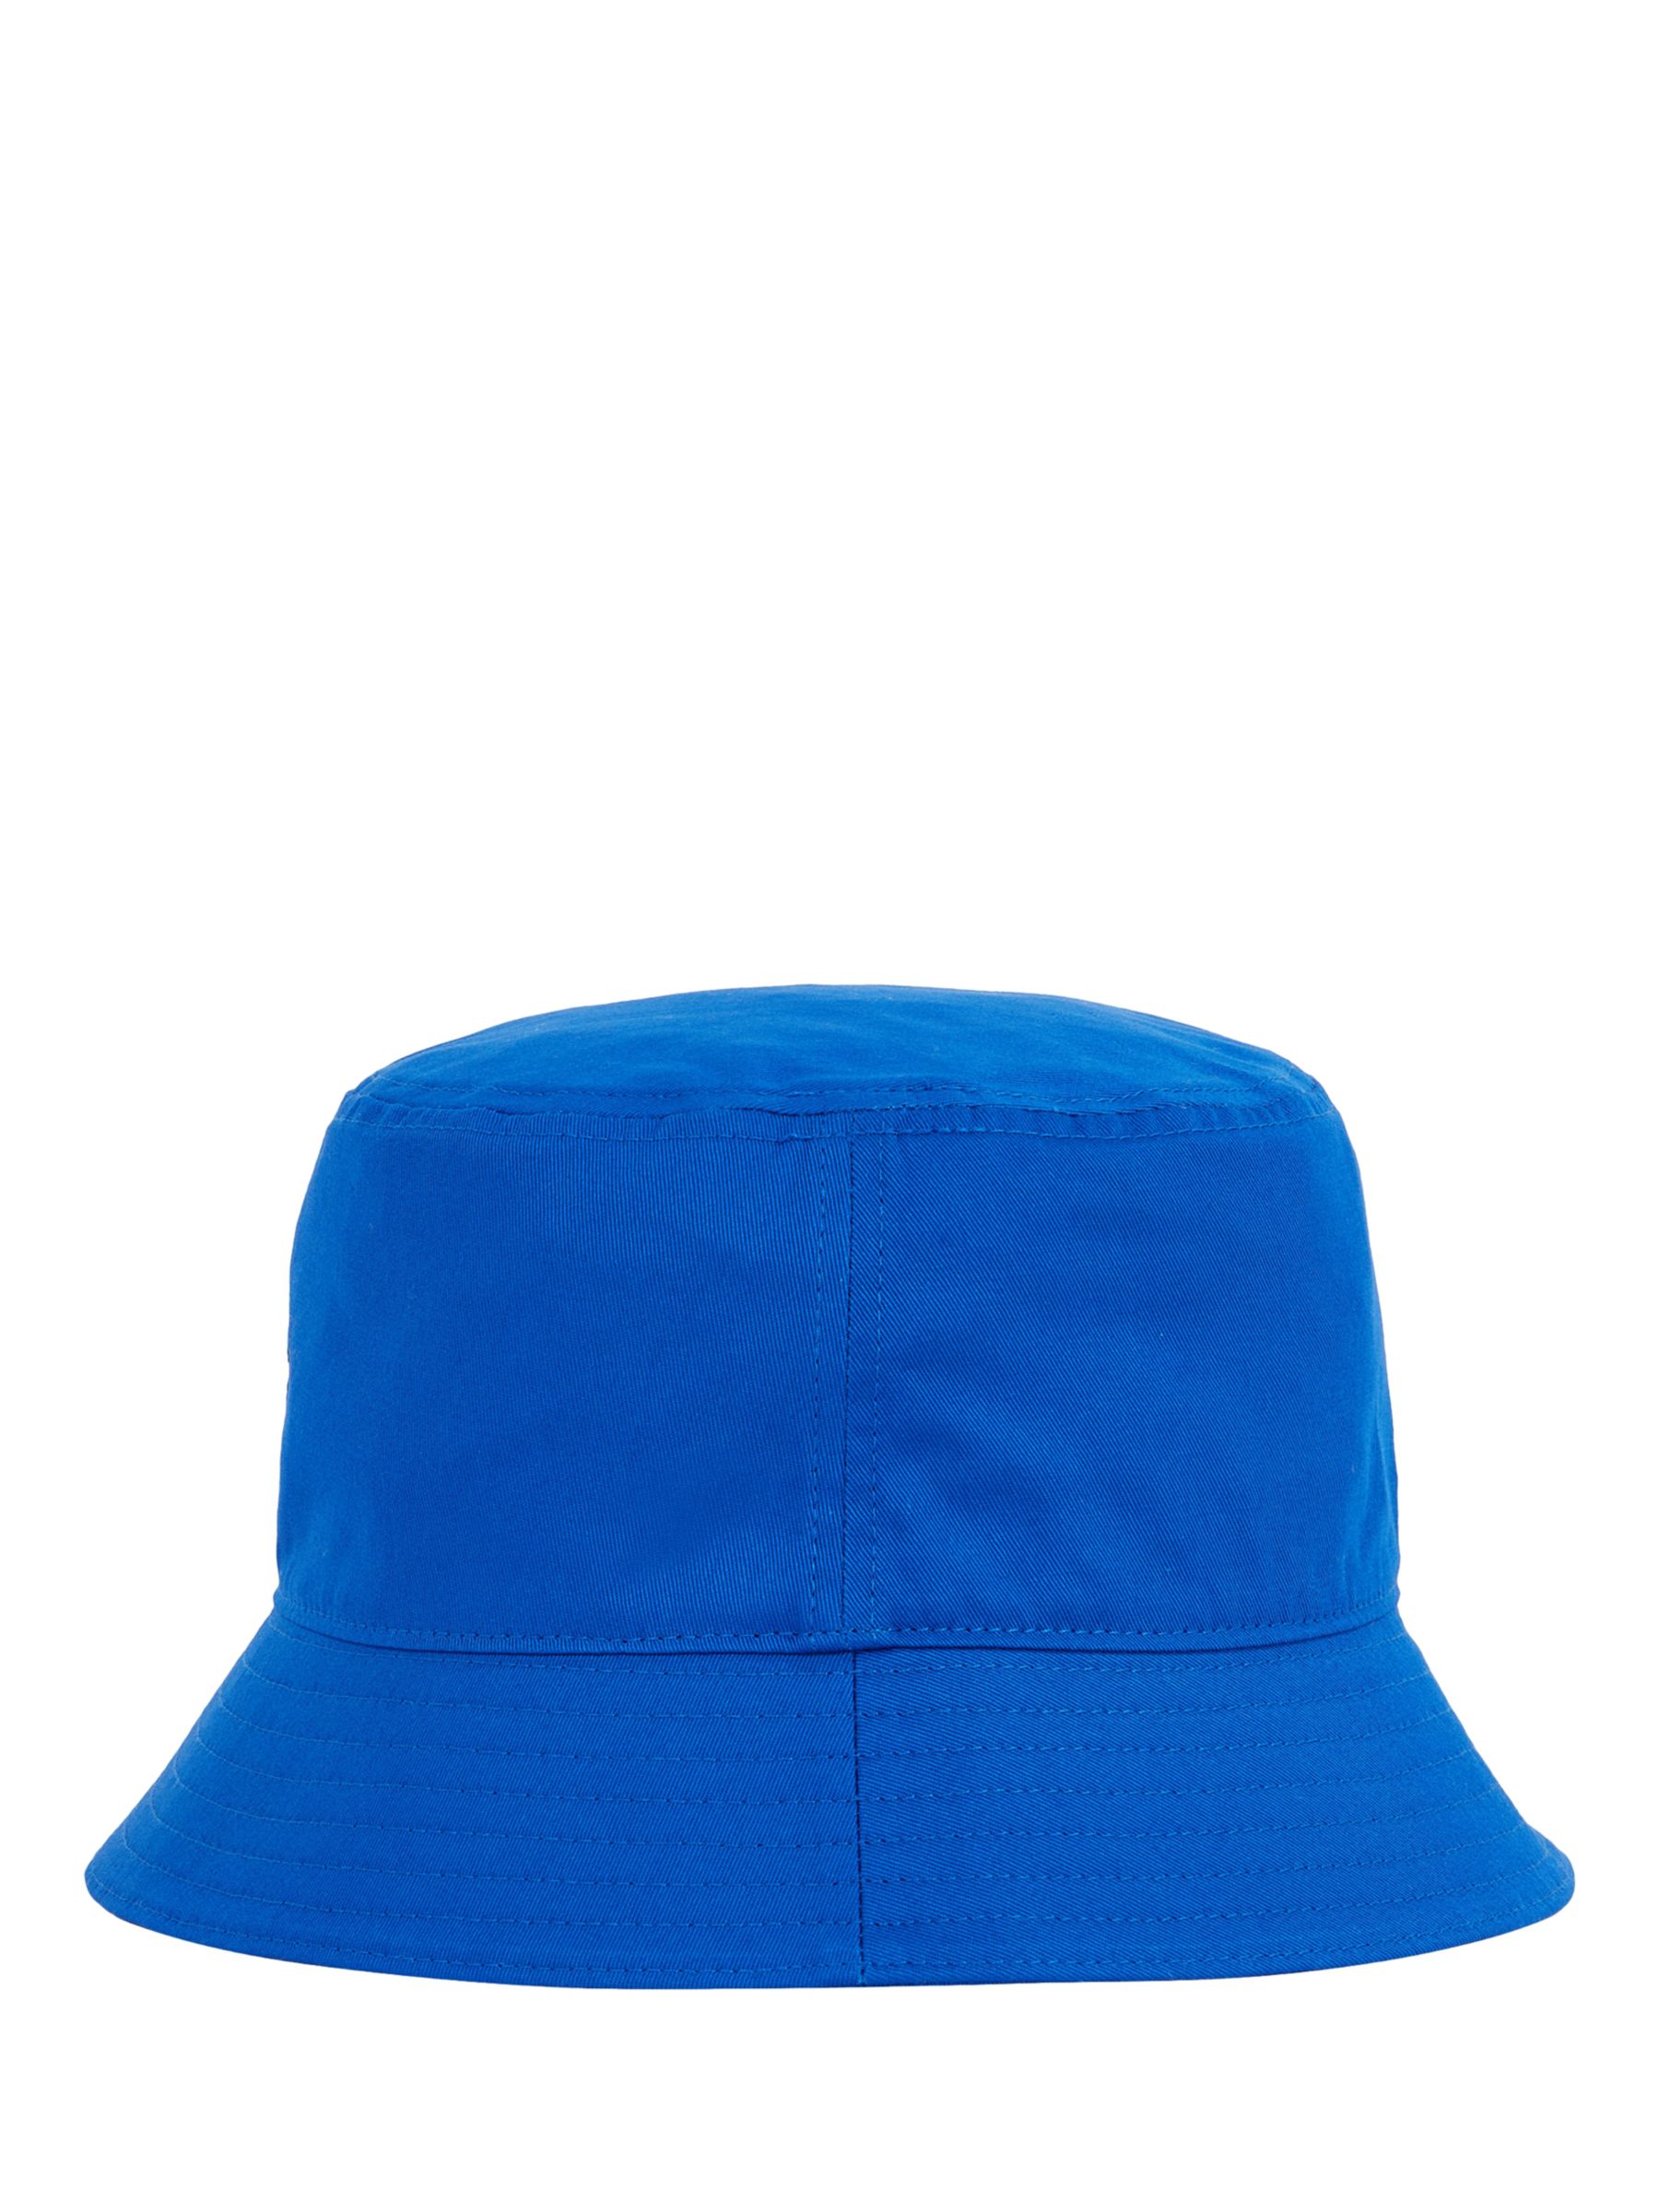 seco feo Peave Tommy Hilfiger Flag Logo Bucket Hat at John Lewis & Partners